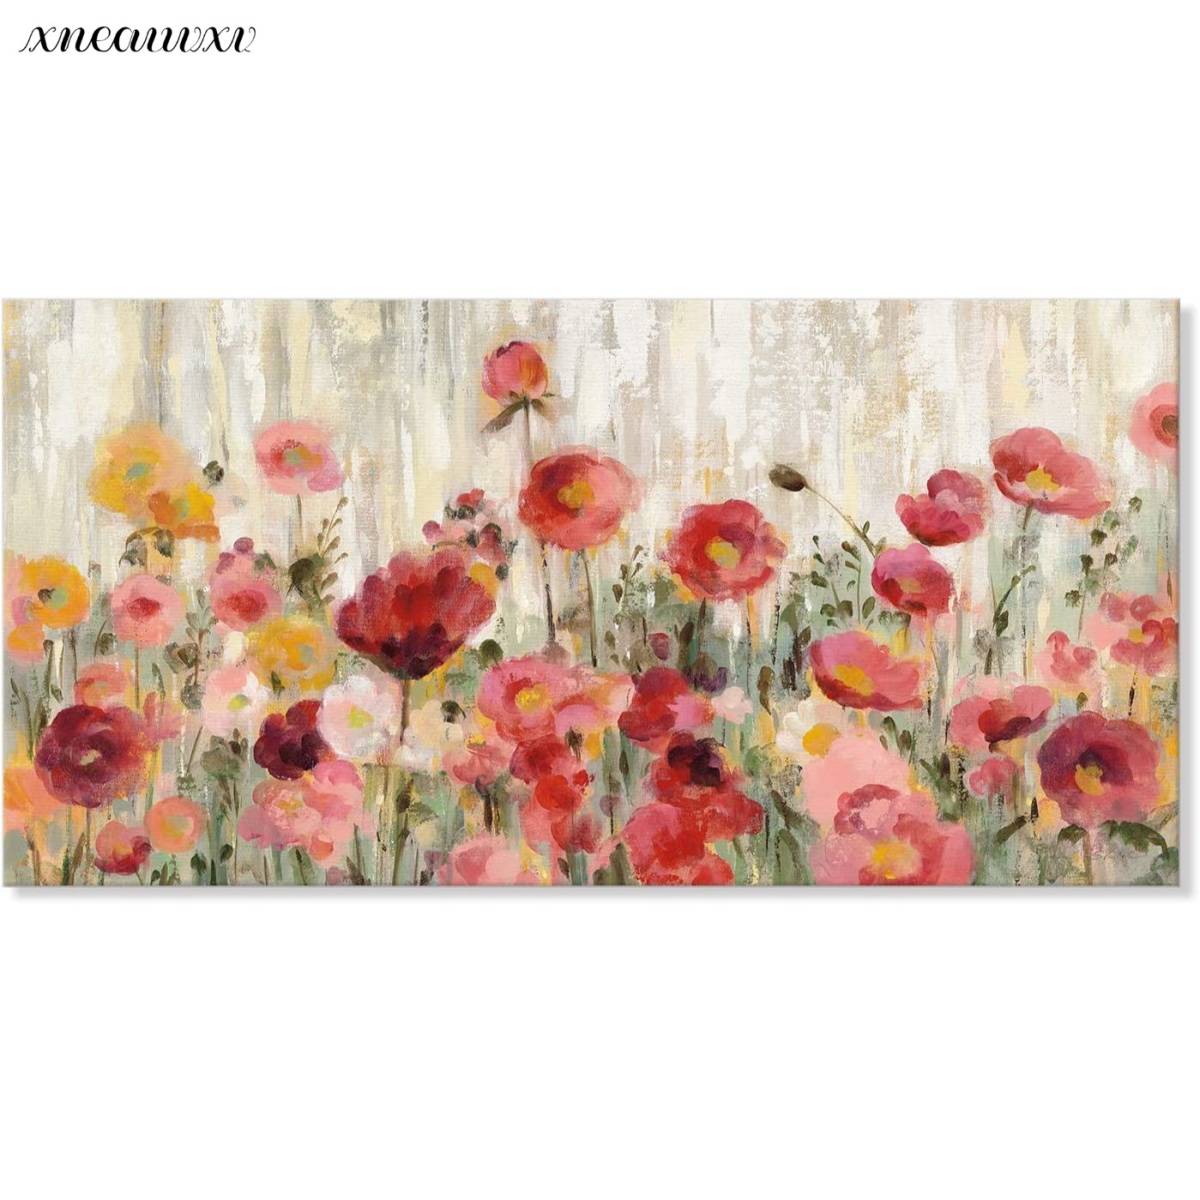 Stylish art panel, flower, wooden frame, easy to install, interior, canvas, decoration, wall art, stylish, appreciation, wall hanging, flowers, plants, colorful, Painting, Oil painting, Nature, Landscape painting